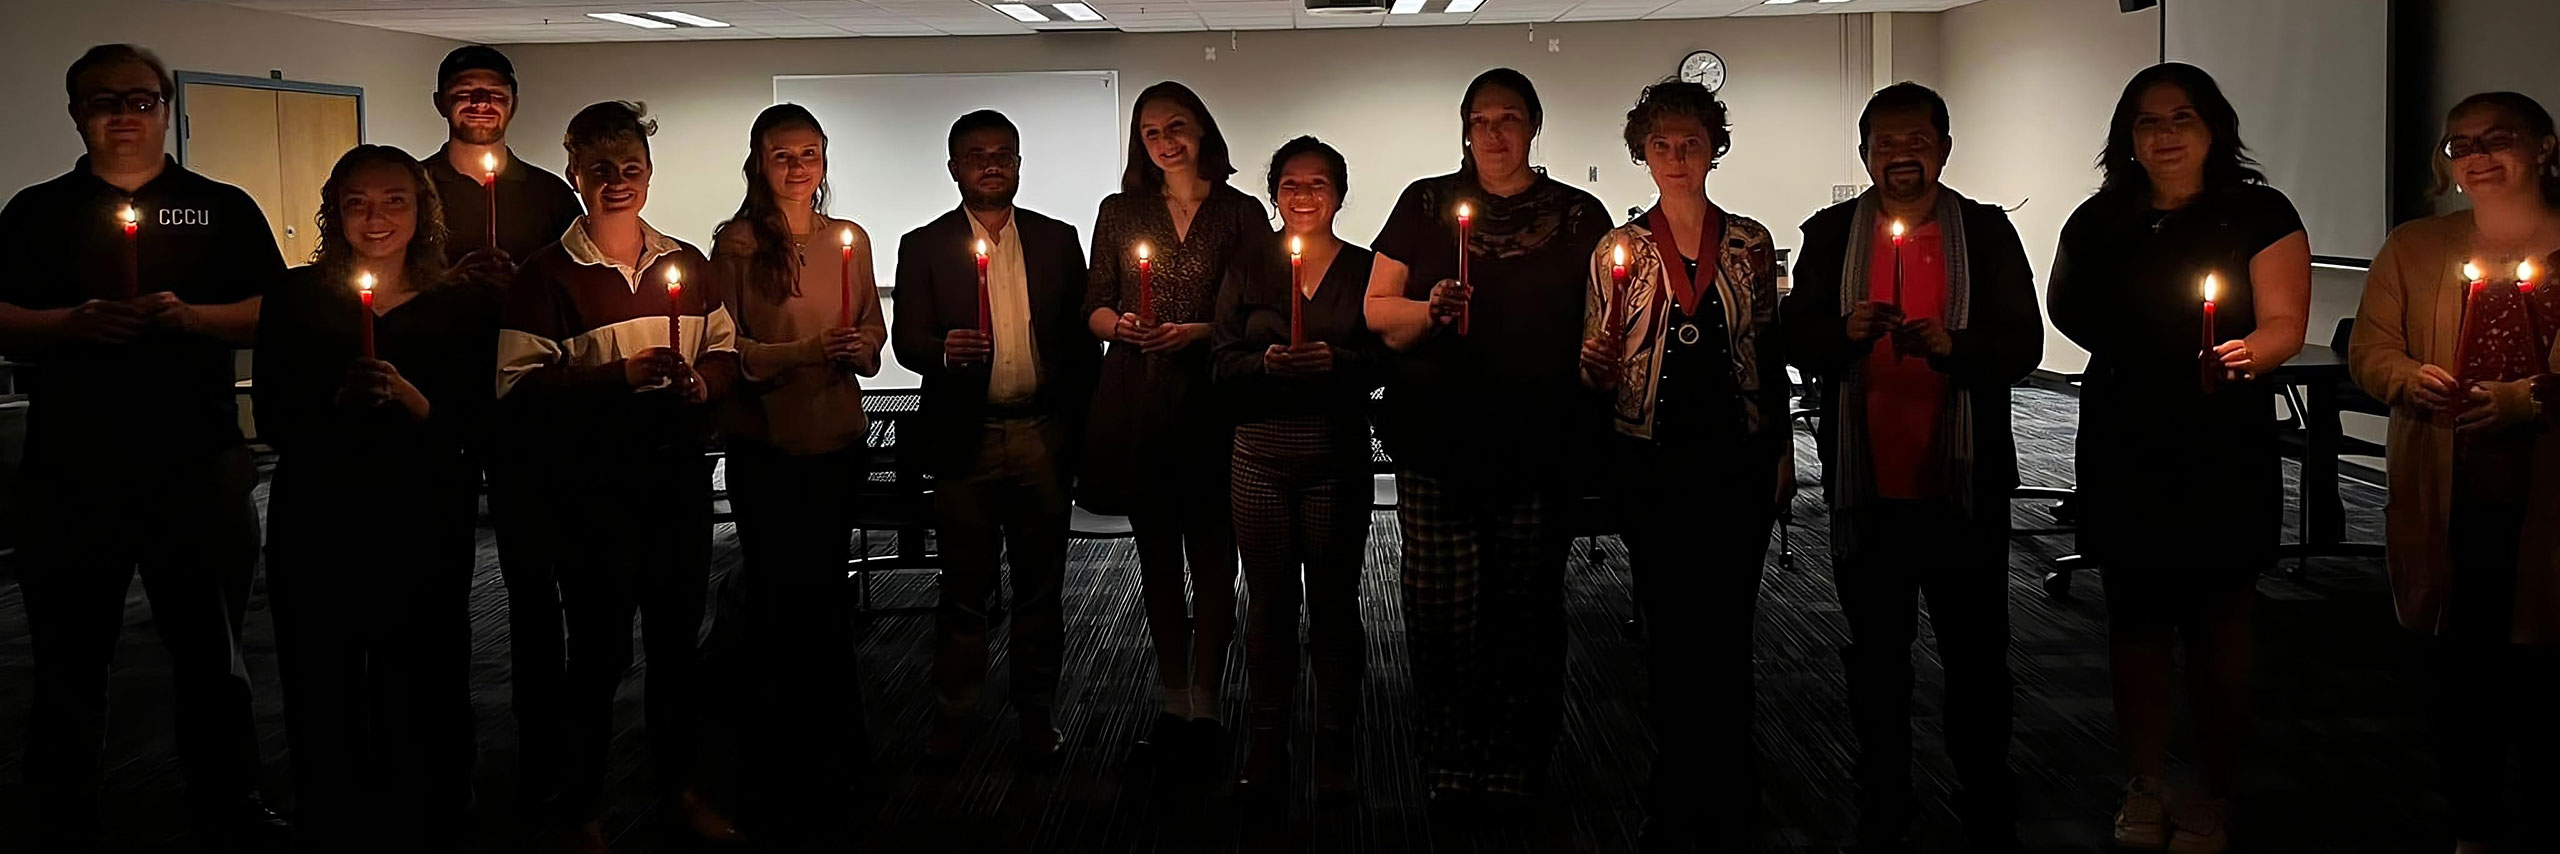 Students holding a lighted candle on a English event